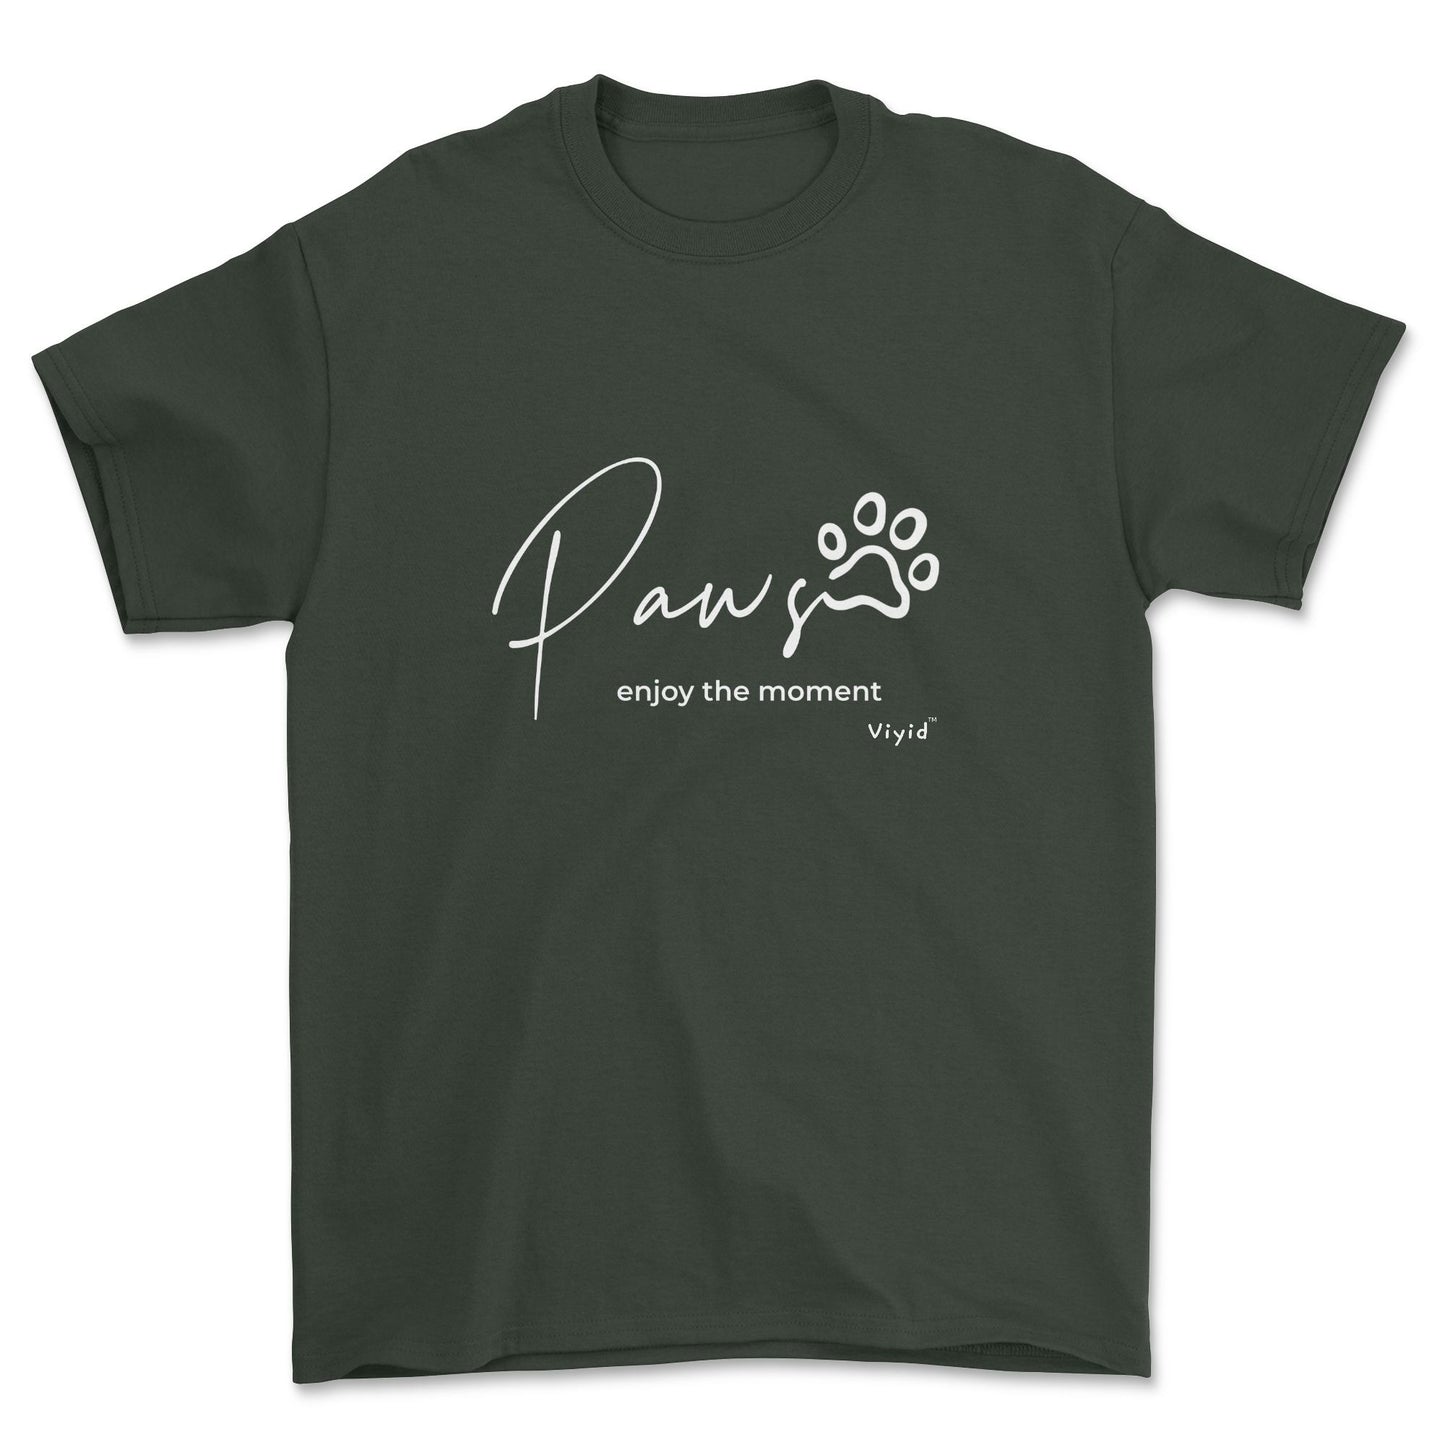 paws enjoy the moment youth t-shirt forest green